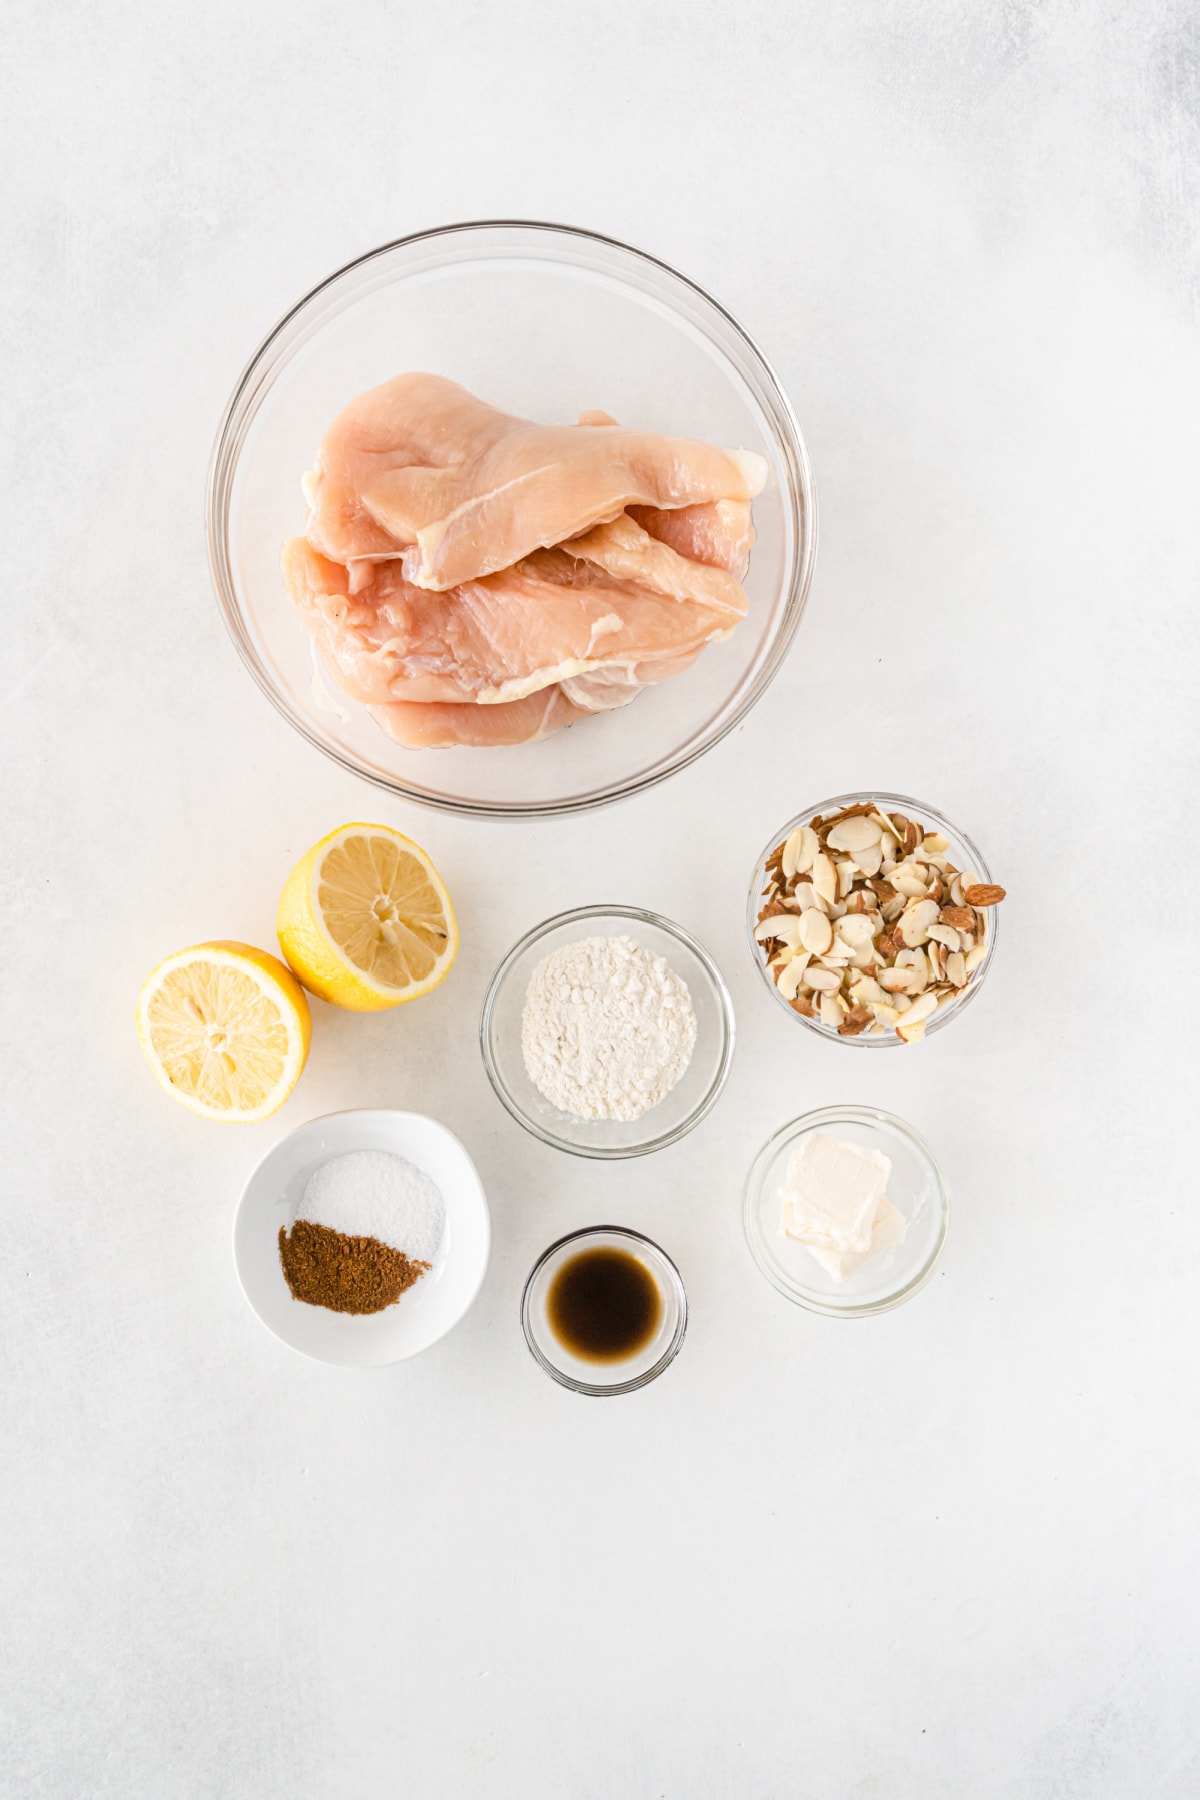 ingredients displayed for making chicken with almond butter